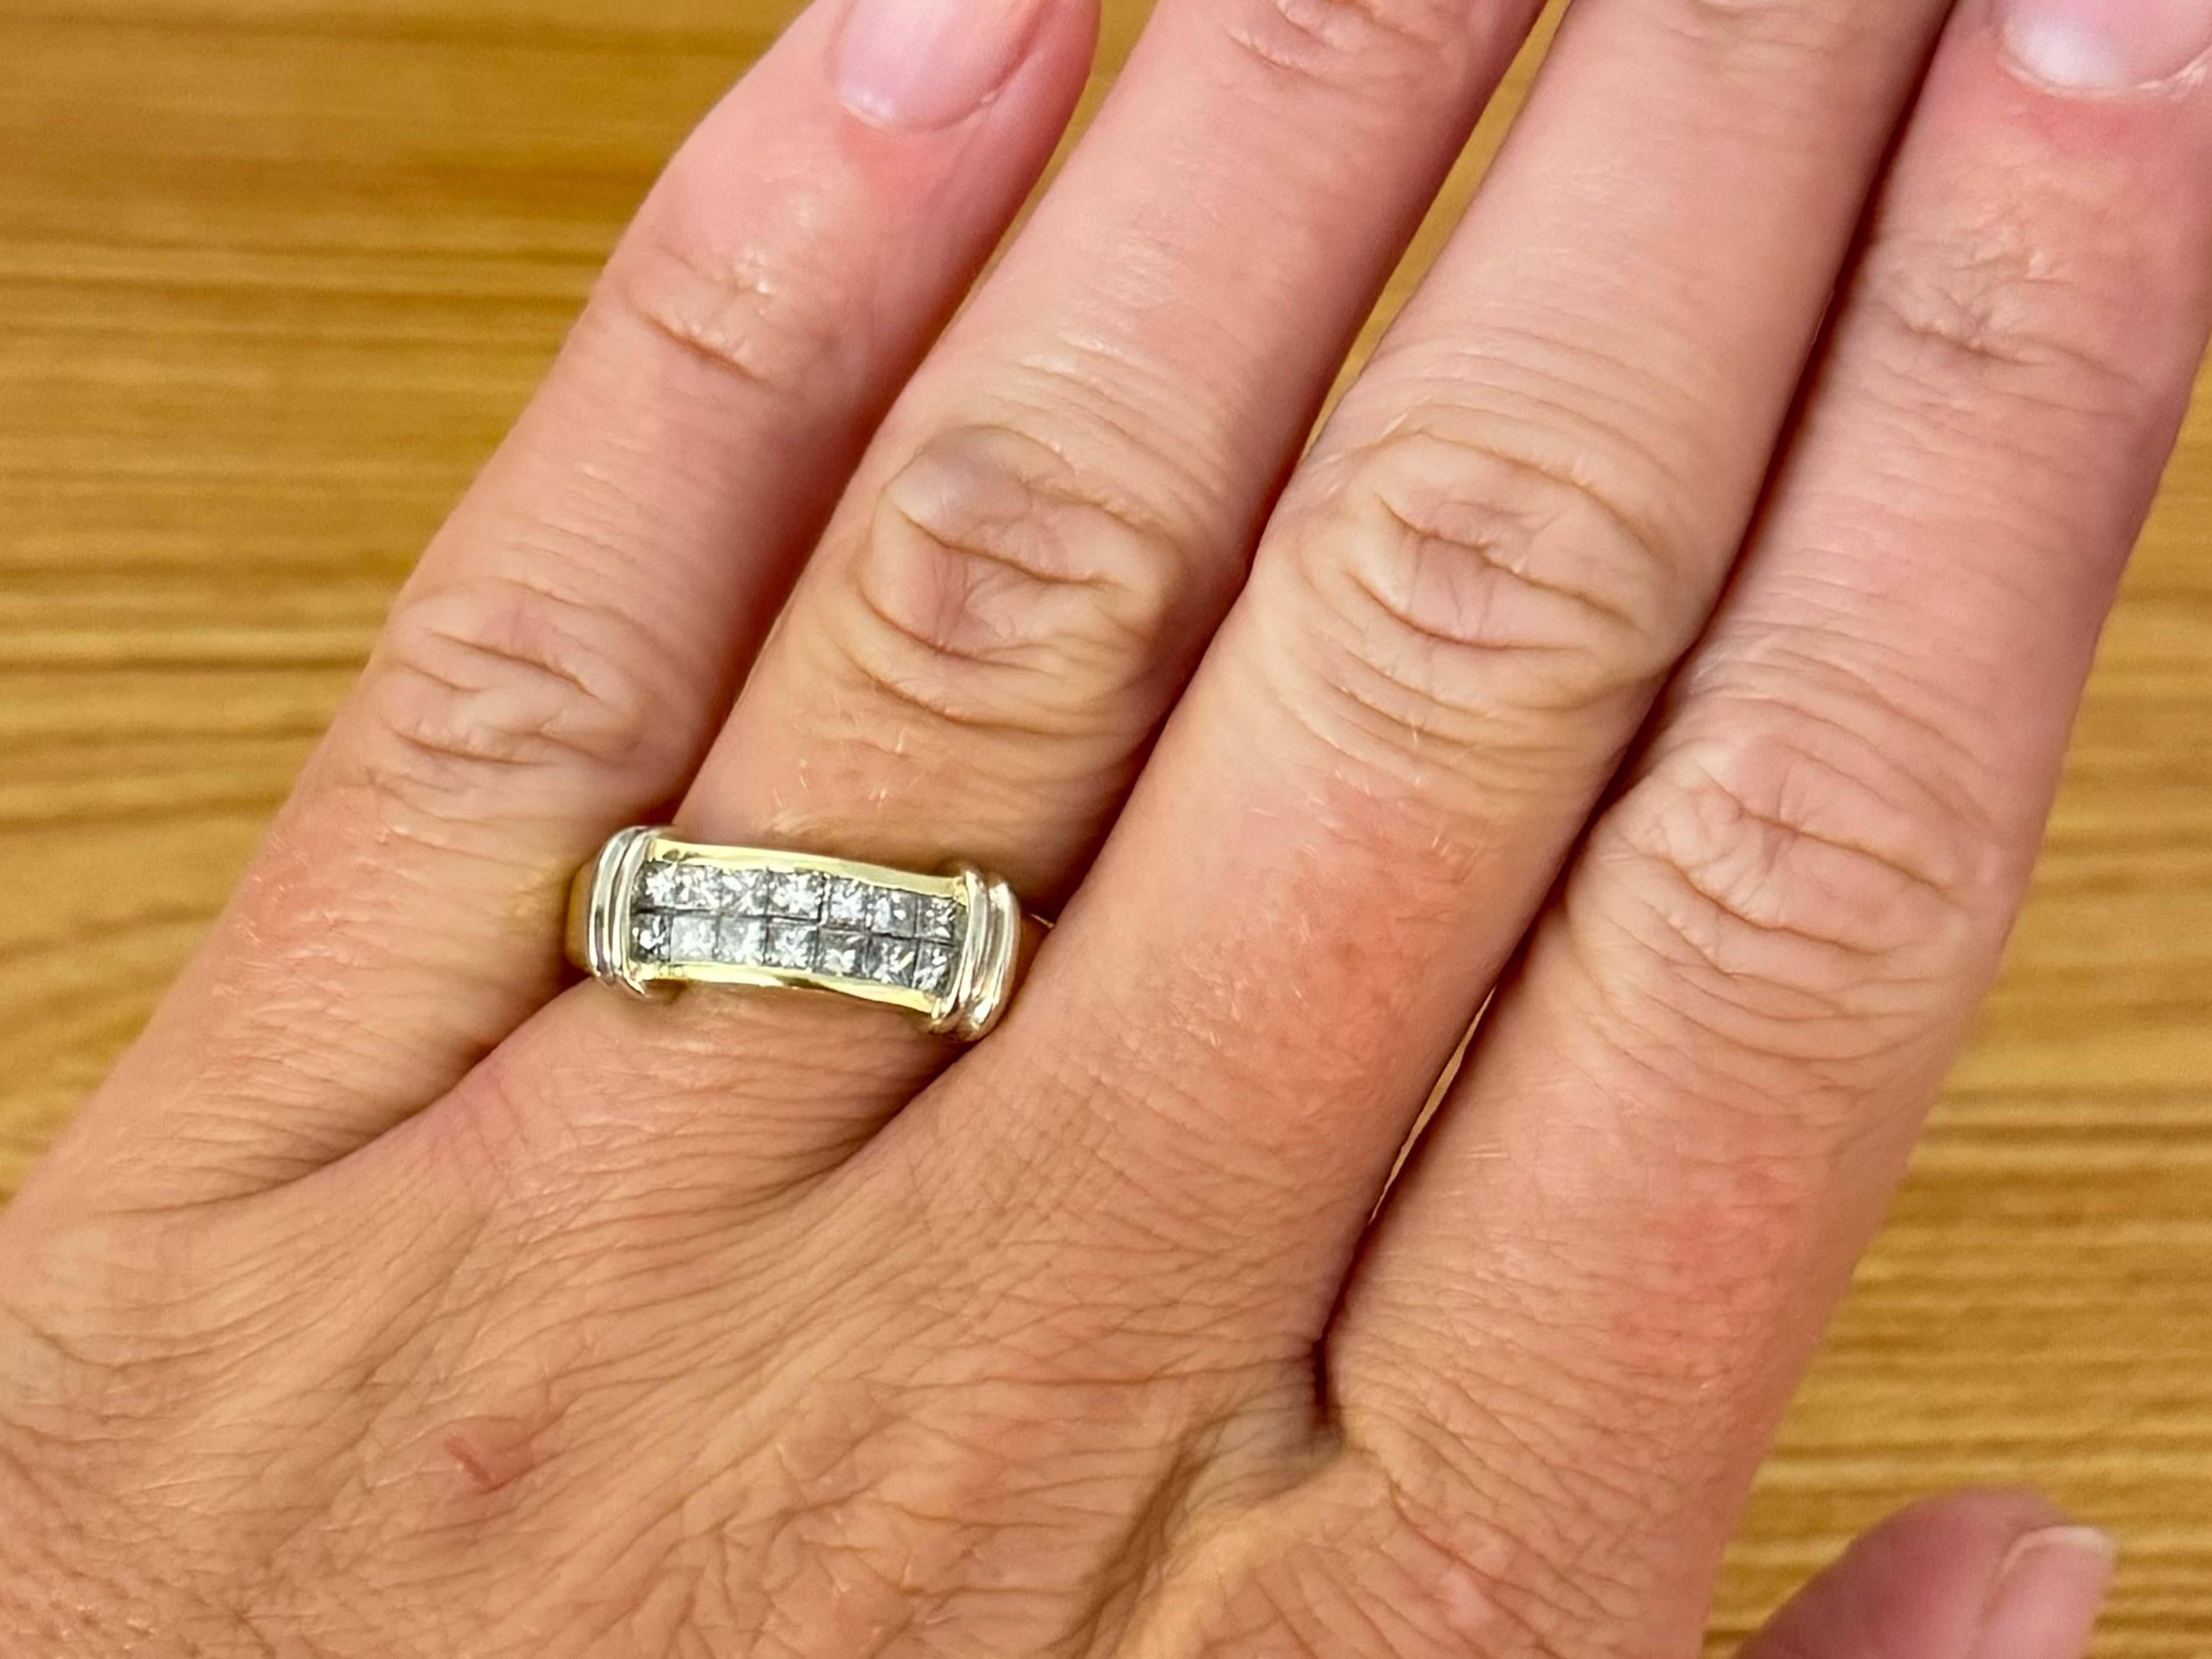 Item Specifications:

Metal: 18k White and Yellow Gold

Diamond Count: 14 princess cut

Total Diamond Carat Weight:  0.70 carats 

Diamond Color: J-K

Diamond Clarity: SI2-I1

Ring Size: 8.5

Total Weight: 7.3 Grams

Stamped: 